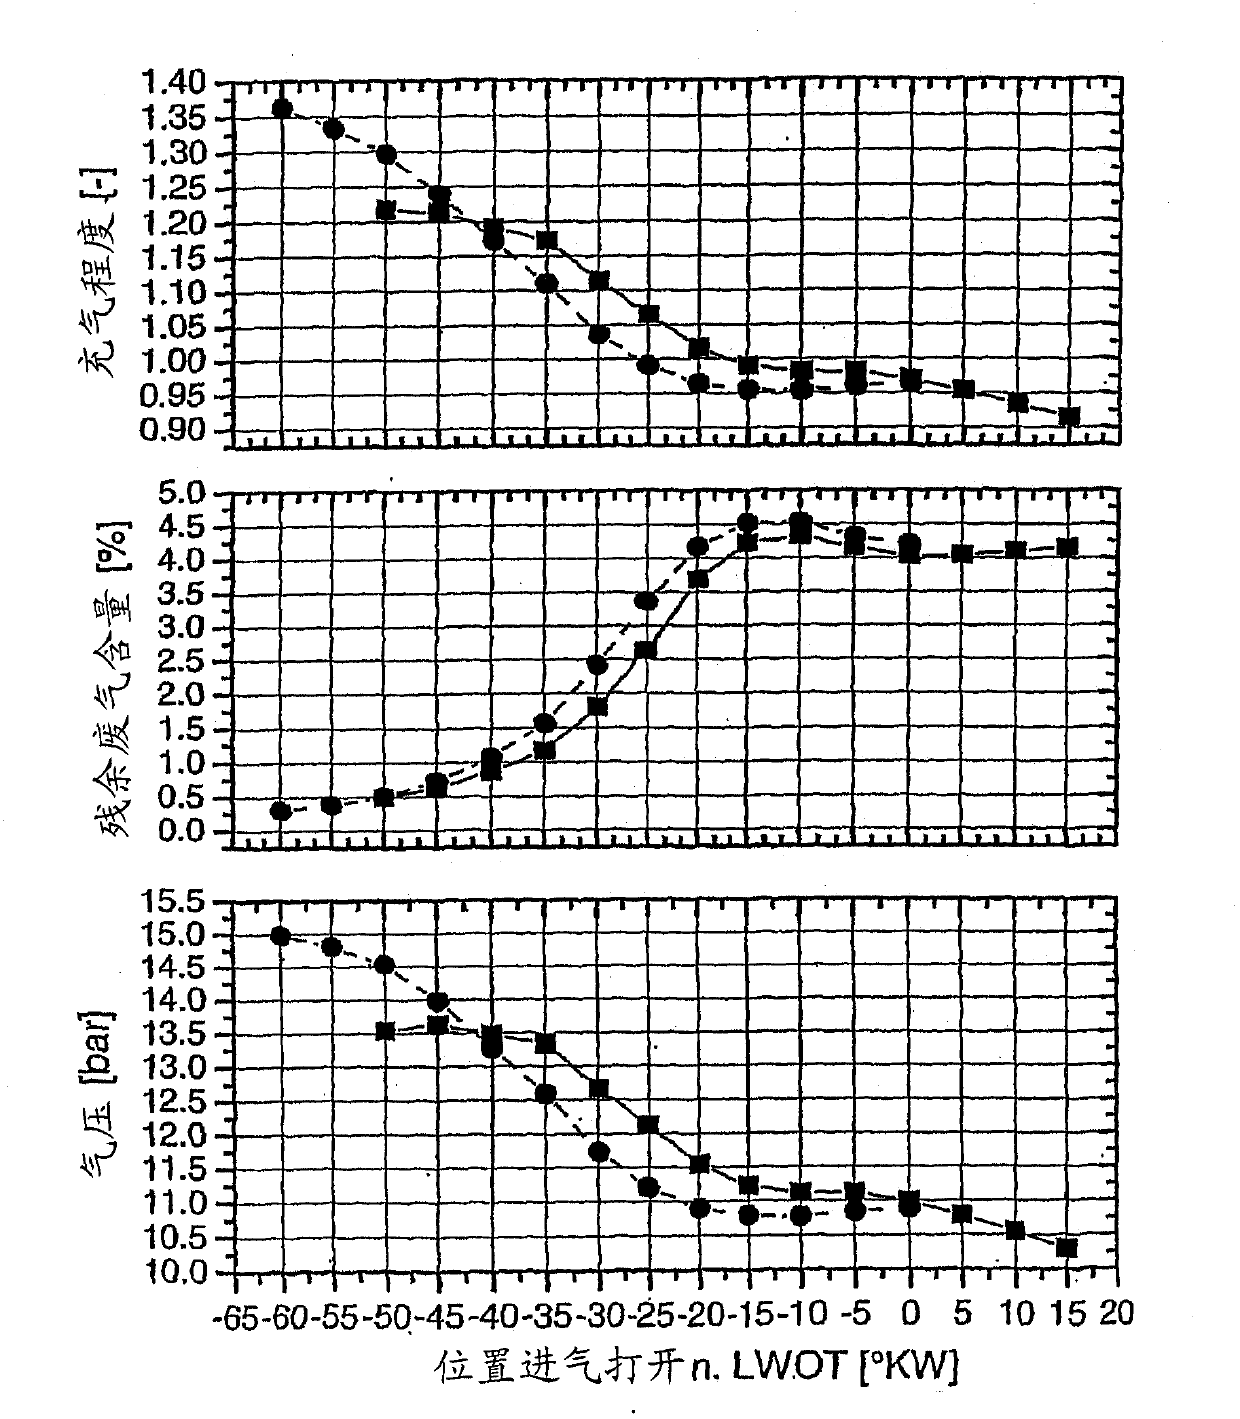 Method for optimizing the operation of a charged reciprocating internal combustion engine in the lower engine speed range